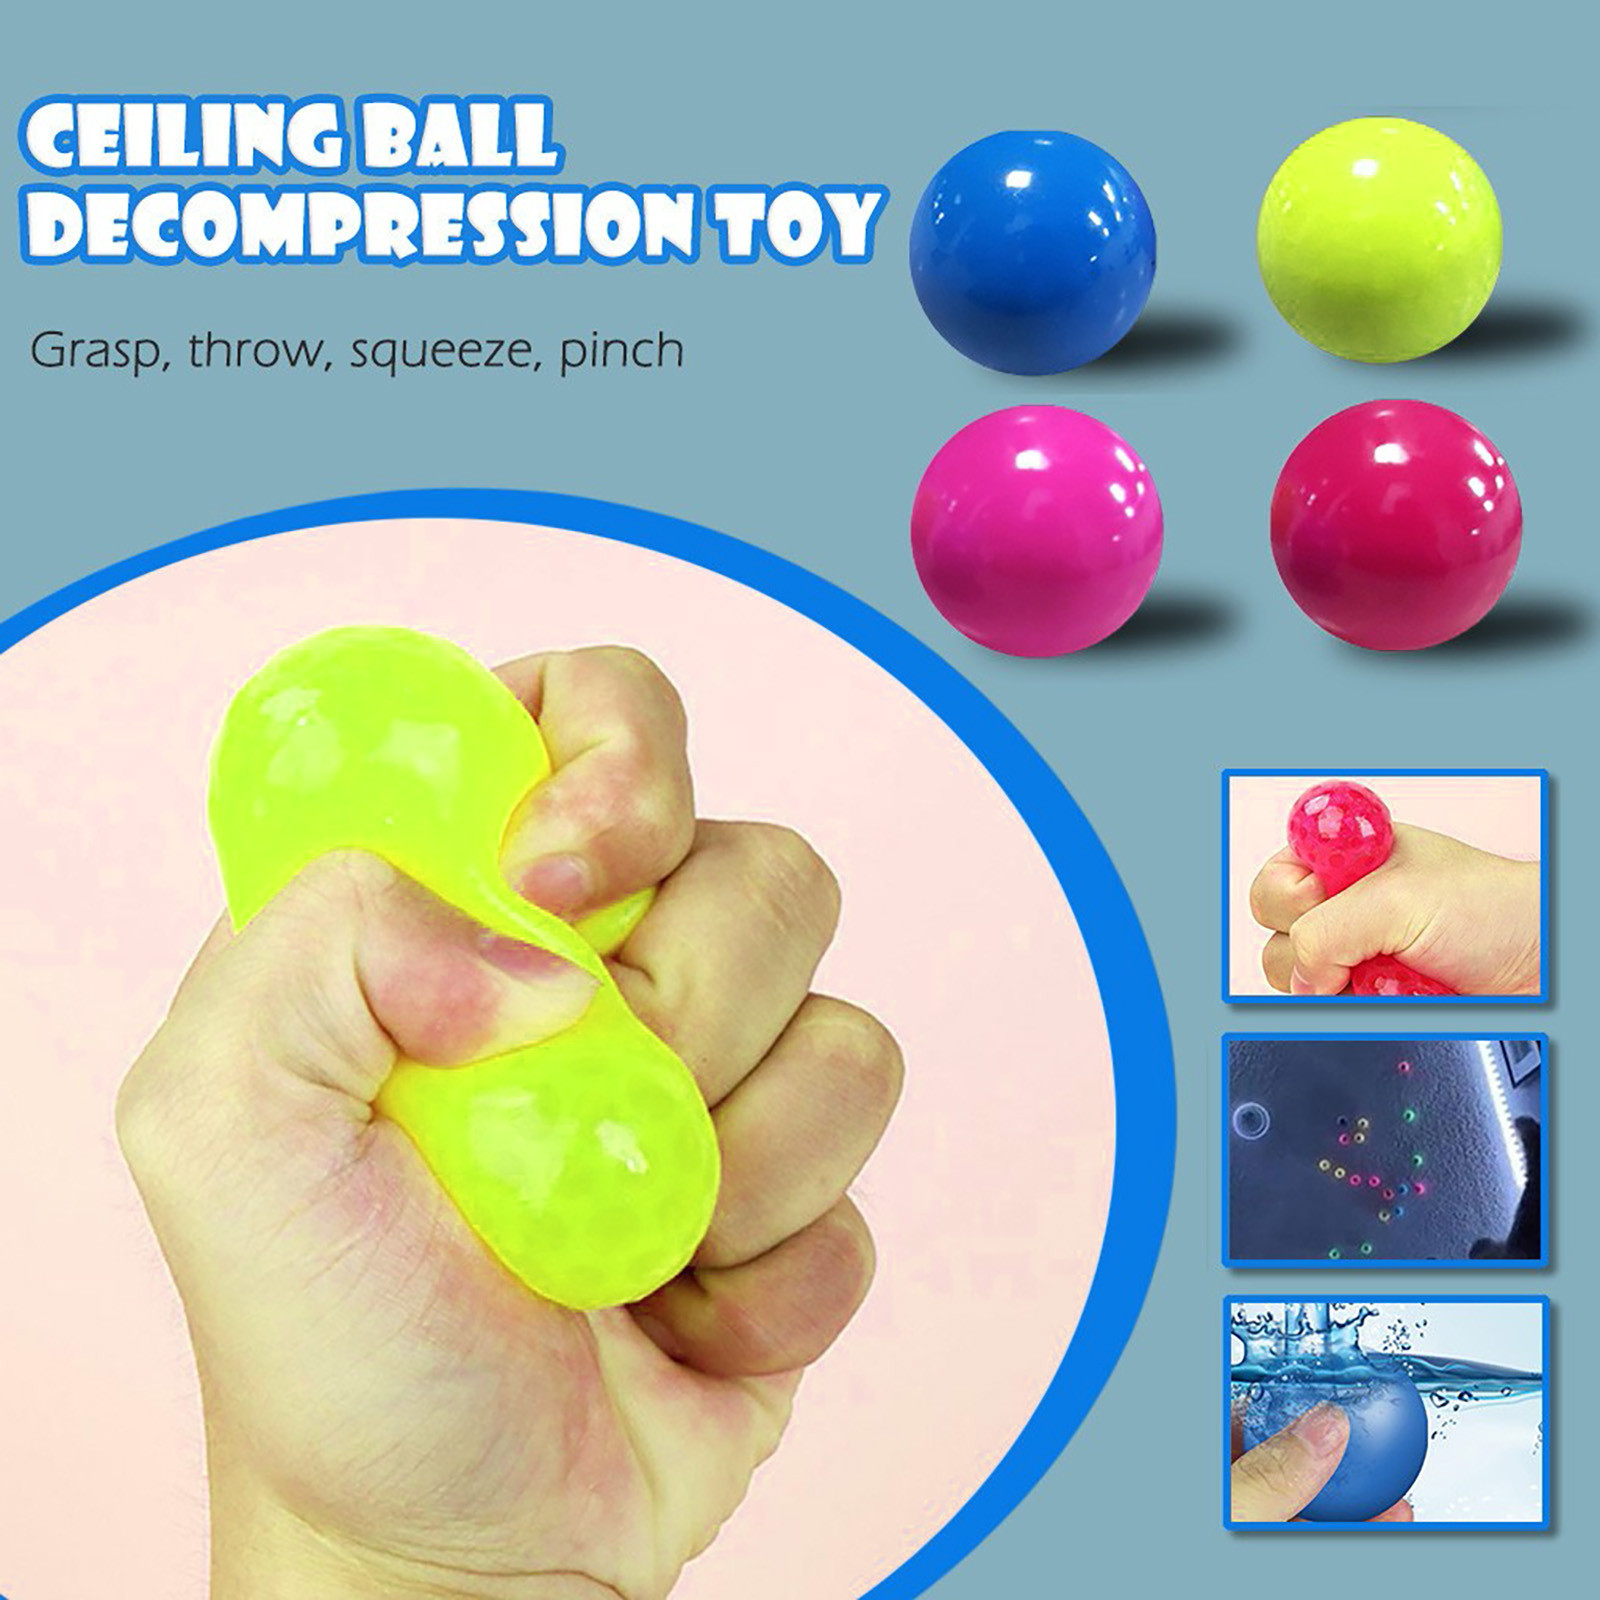 Details about   4X Balls Throw At Ceiling Decompression Ball Sticky Target Decompression Toy qiu 